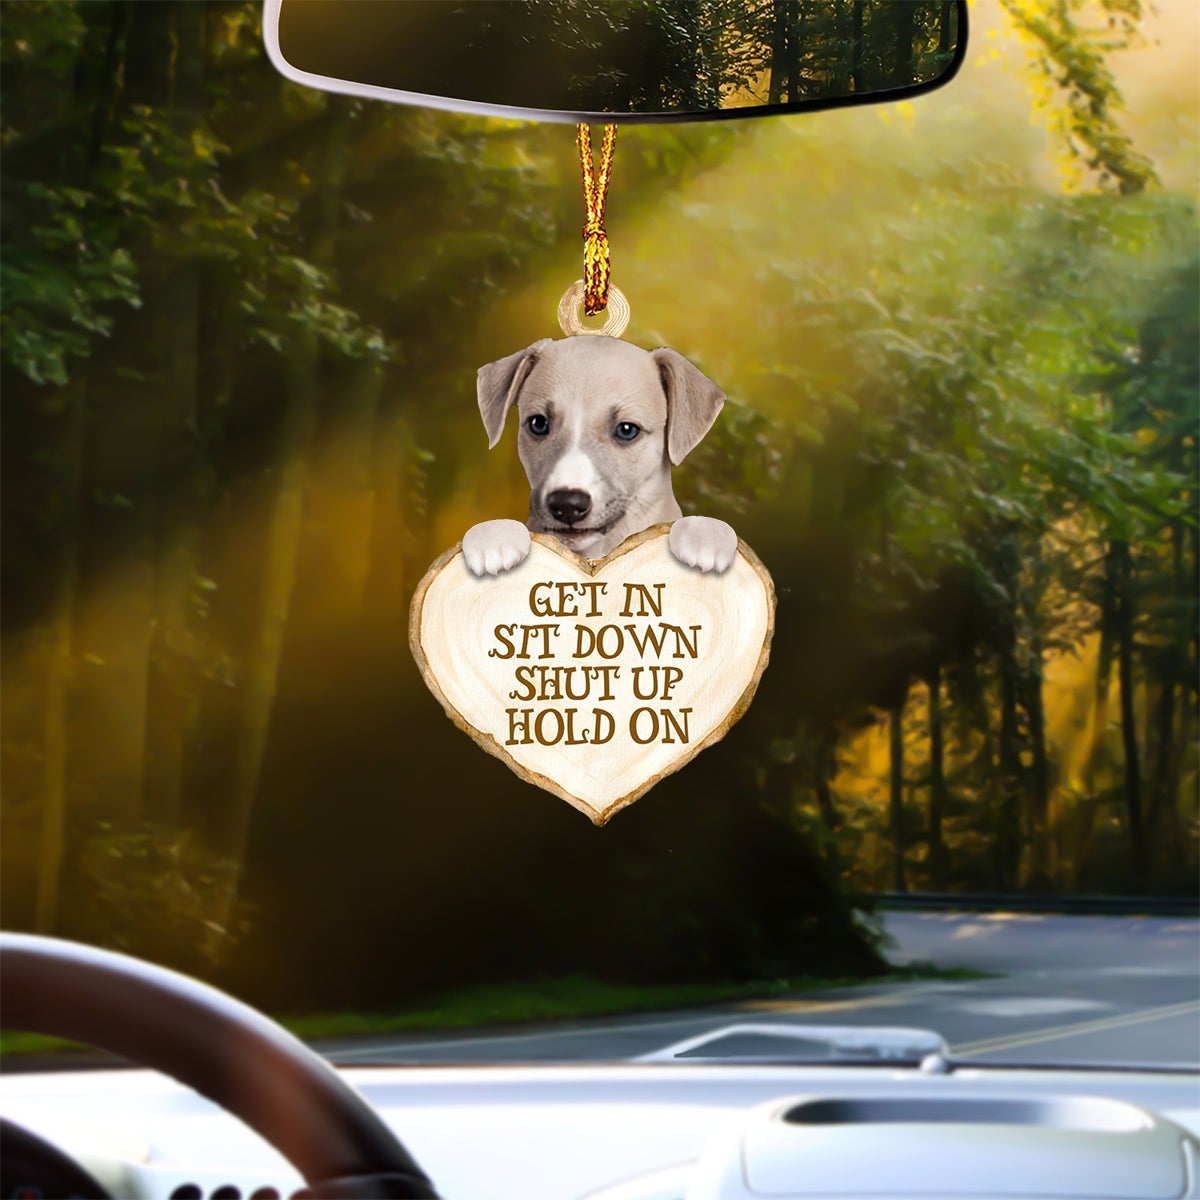 Greyhound Heart Shape Get In Car Hanging Ornament